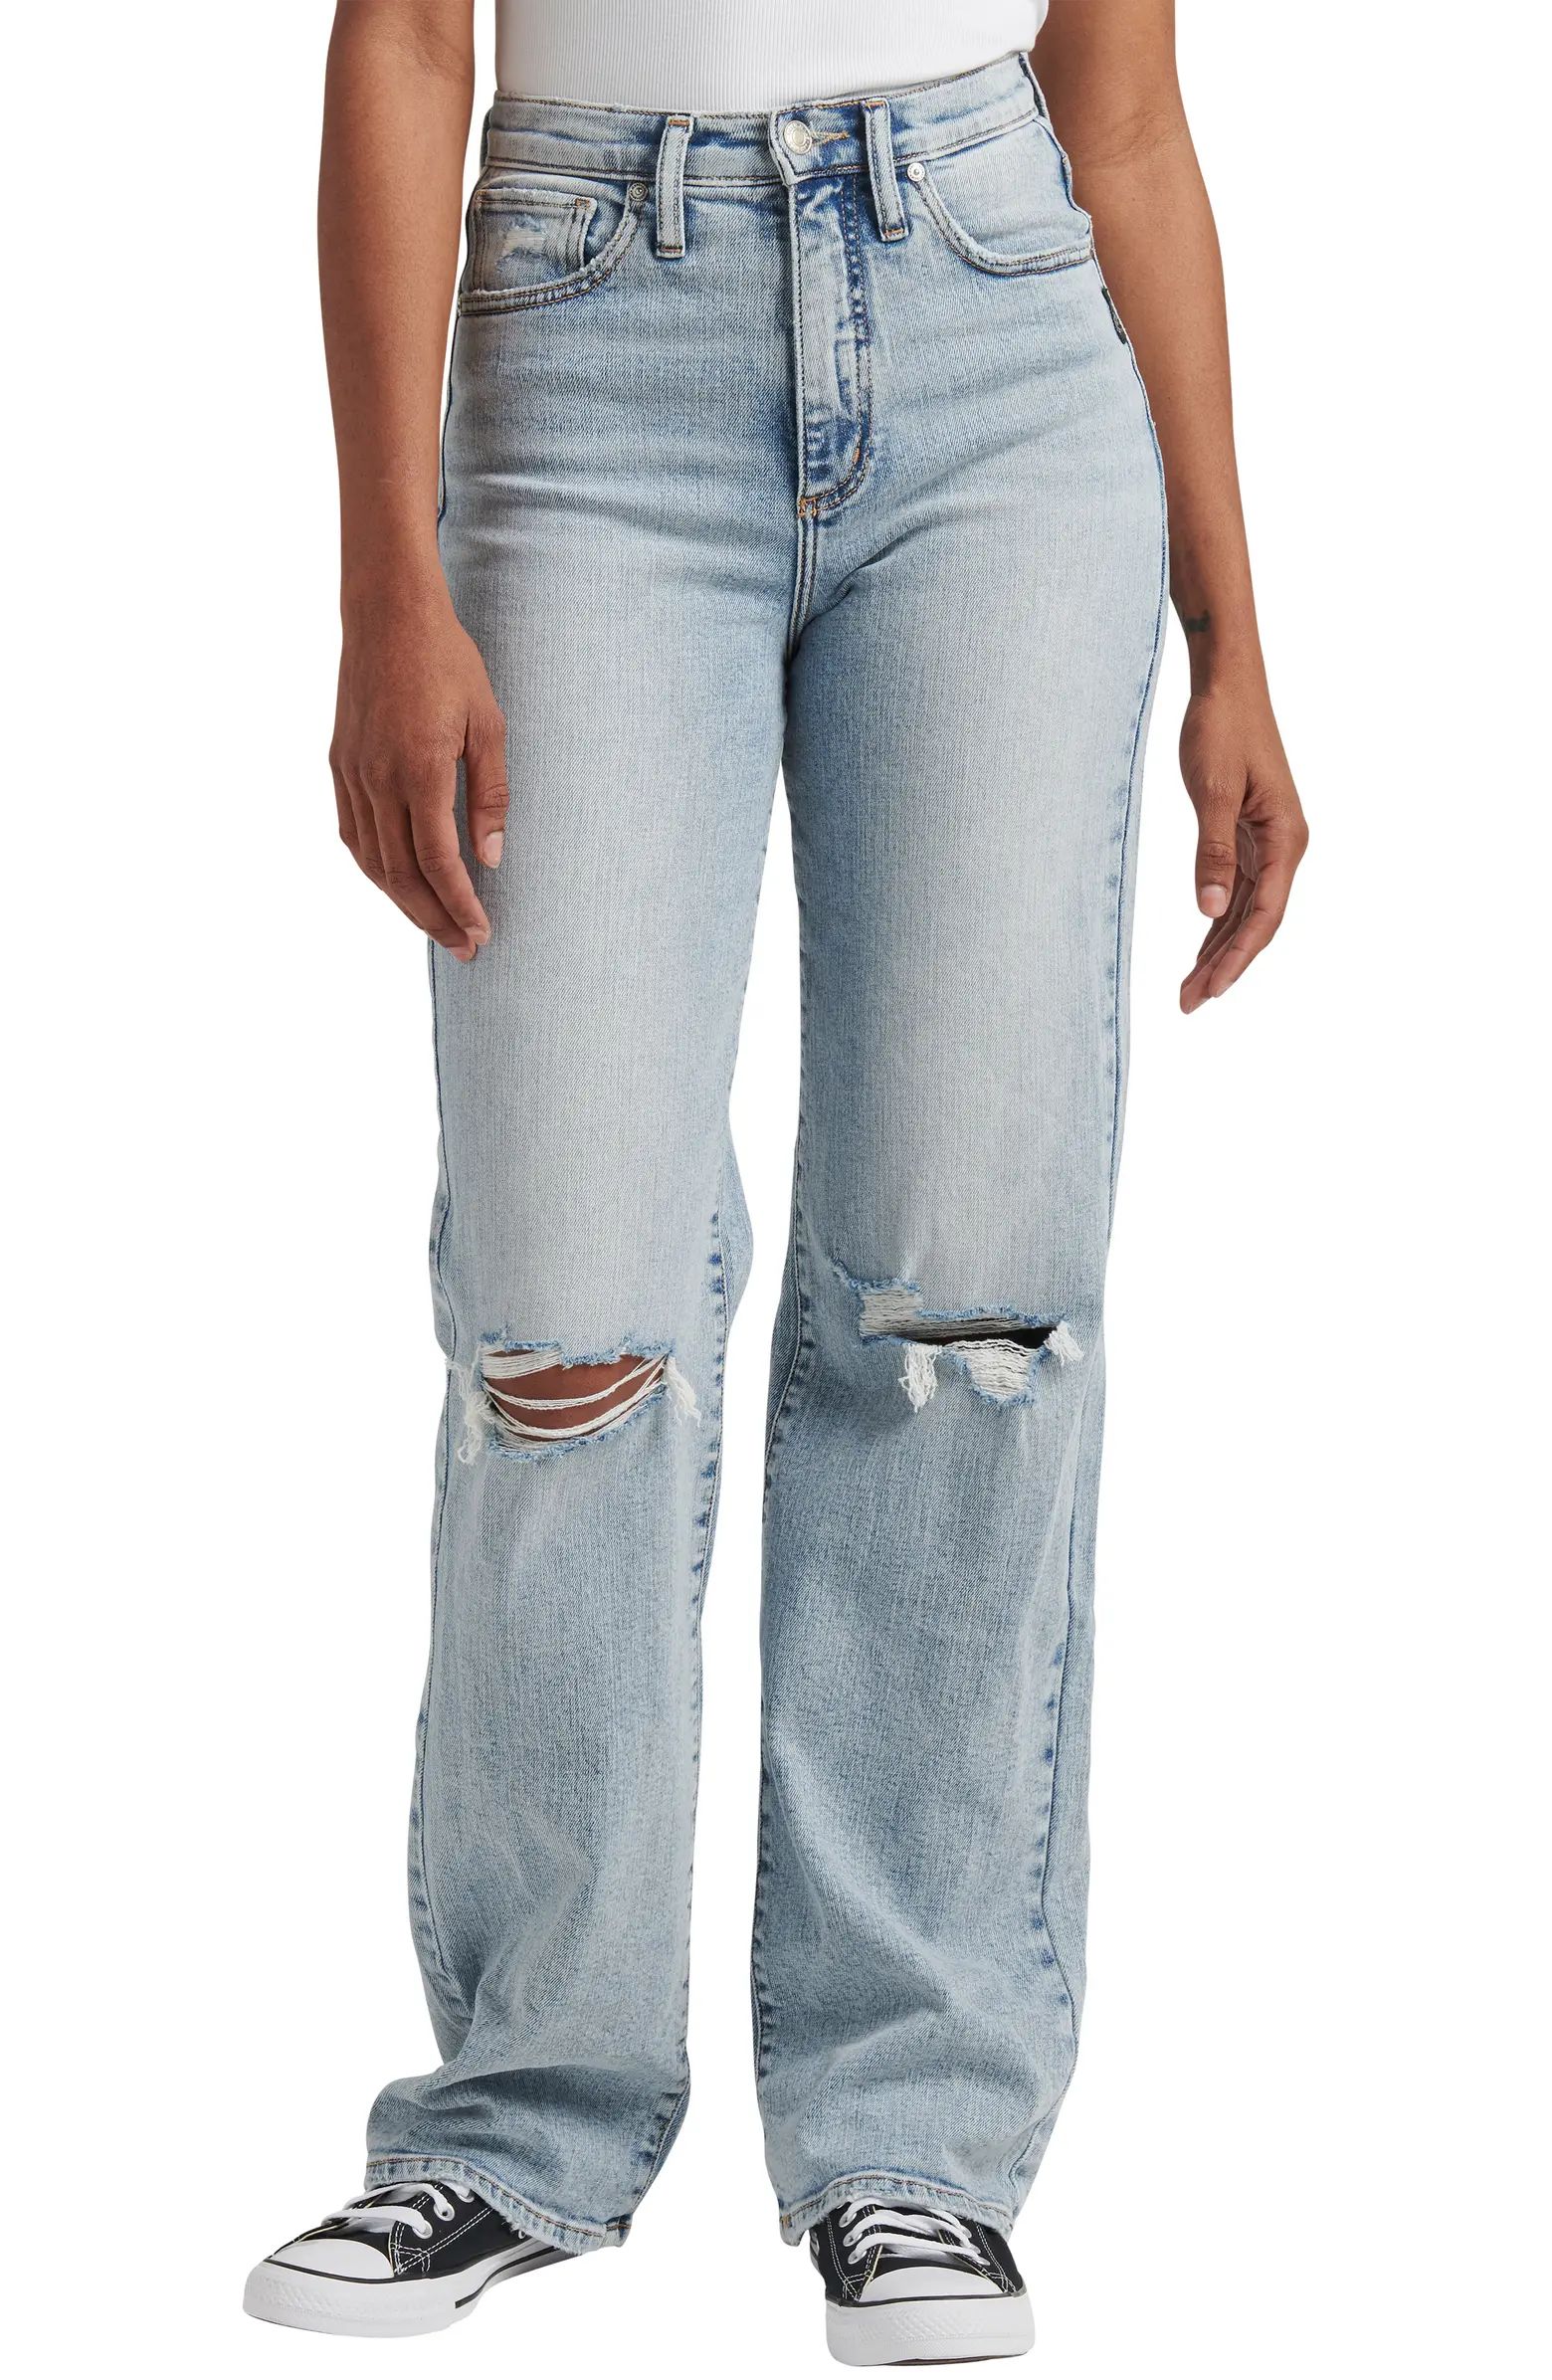 Silver Jeans Co. Highly Desirable Ripped High Waist Wide Leg Jeans | Nordstrom | Nordstrom